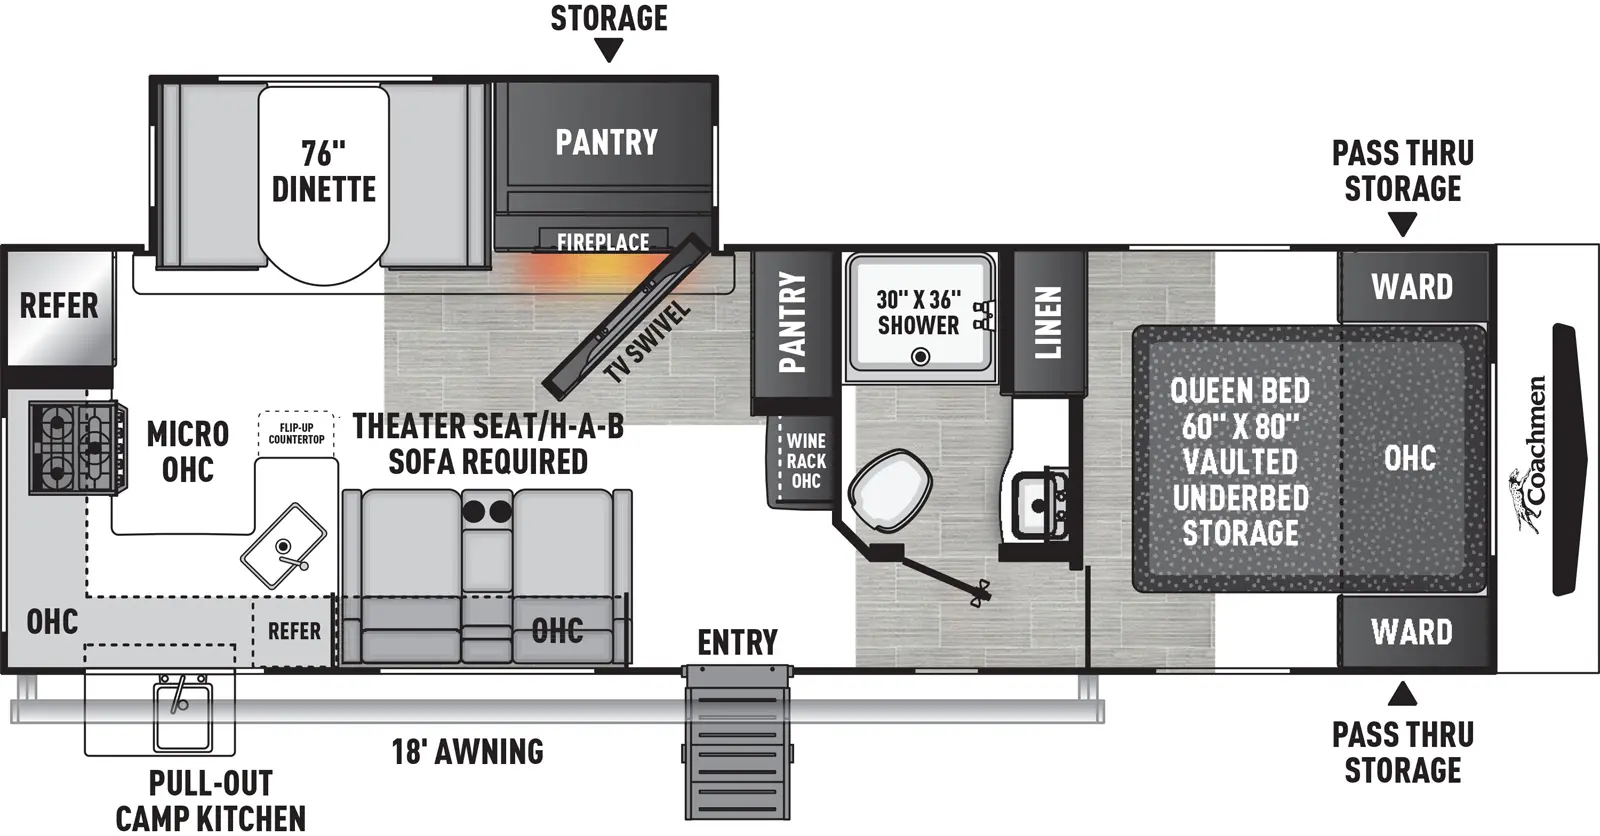 The 274RKS has one slideout and one entry. Exterior features front pass-thru storage, 18 foot awning, off-door side storage, and pull-out camp kitchen with refrigerator and sink. Interior layout front to back: foot-facing queen bed with vaulted underbed storage, overhead cabinet, and wardrobes on either side of bed, and off-door side linen closet; off-door side full bathroom; wine rack and pantry along inner wall; off-door side slideout with entertainment center with swivel television and fireplace and hidden pantry next to a dinette; door side entry and theater seat/hide-a-bed sofa; peninsula kitchen counter with flip-up counter wraps to door side with sink and overhead cabinet, and continues to wrap to rear with microwave, cooktop, and refrigerator.